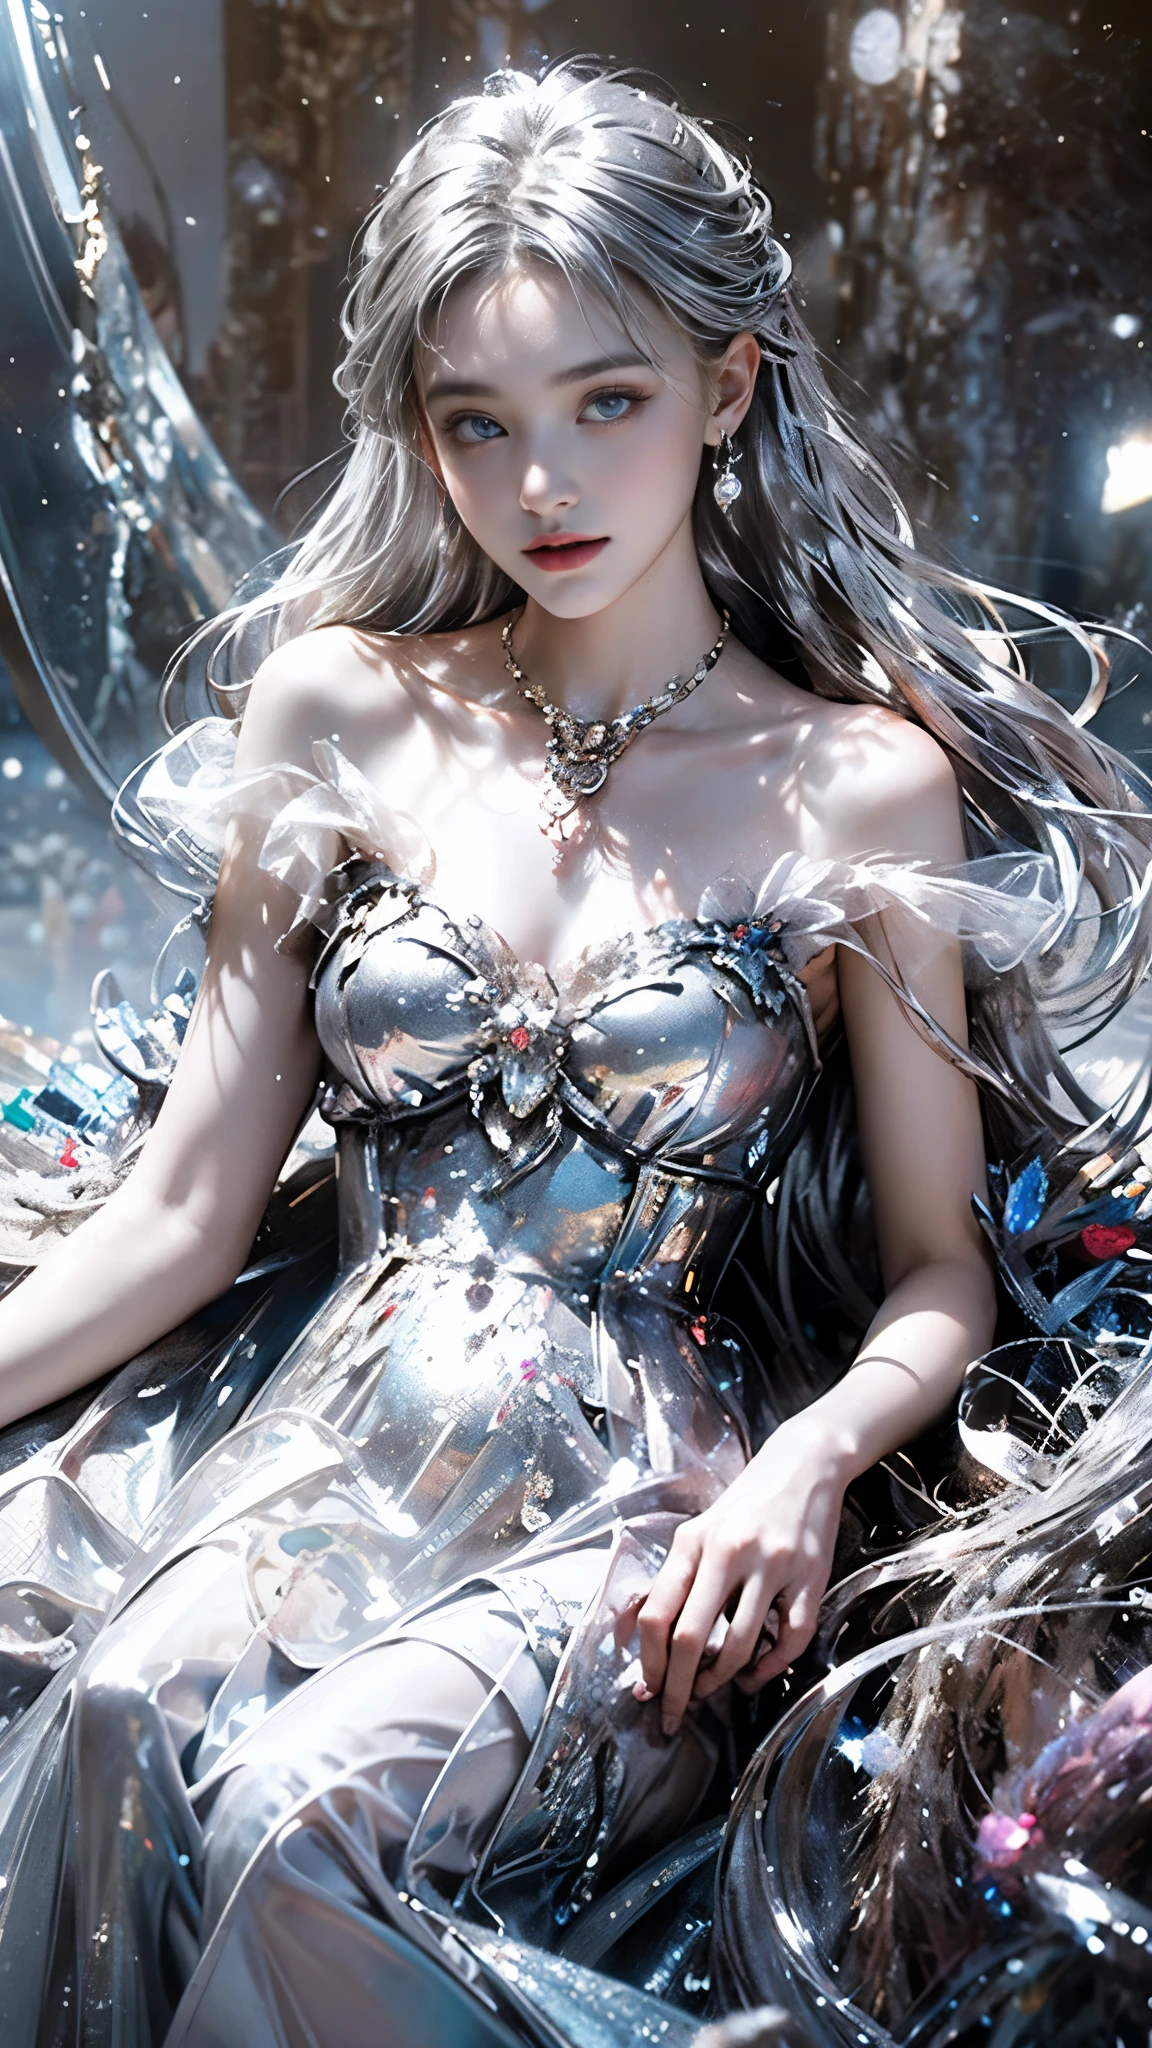 8K, ultra hd, masterpiece, 1 girl, (good face:1.4), detailed eyes, very long hair, impressive hairstyle, earings, necklace, small breasts, (silver dress:1.5), see-through, (fantasy dress:1.5) Light-colored foundation brings out the transparency of the skin, (in the wonderland:1.5), mystery, diwali lights, glowing lights, very decoration, The lights falls like water, perfect front body, sitting,